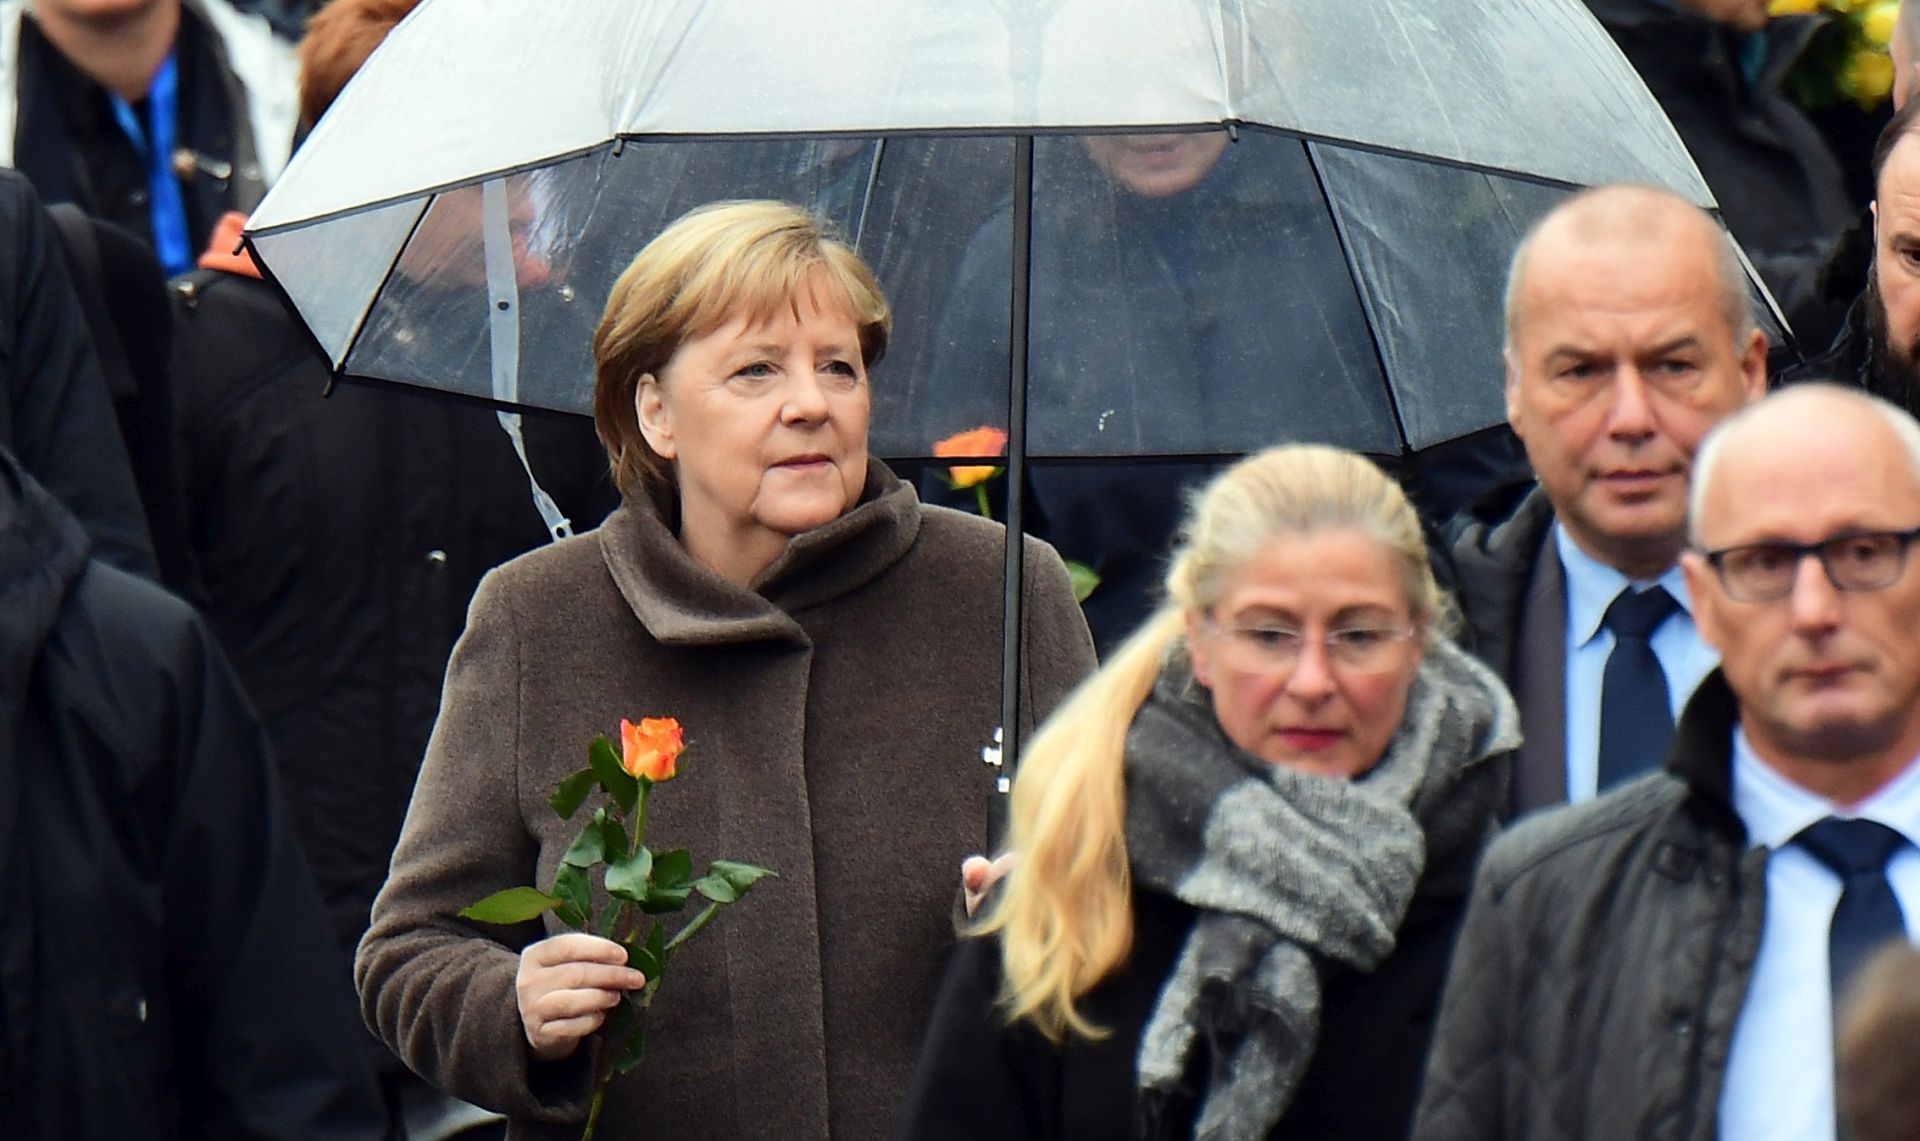 epa07982896 German Chancellor Angela Merkel (C) arrives for the celebrations of the 30th anniversary of the fall of the Berlin Wall at the Berlin Wall Memorial site along Bernauer street in Berlin, Germany, 09 November 2019. The fall of the Berlin Wall led to the collapse of the communist East German GDR government in 1989 and the eventual reunification of East and West Germany.  EPA/CLEMENS BILAN